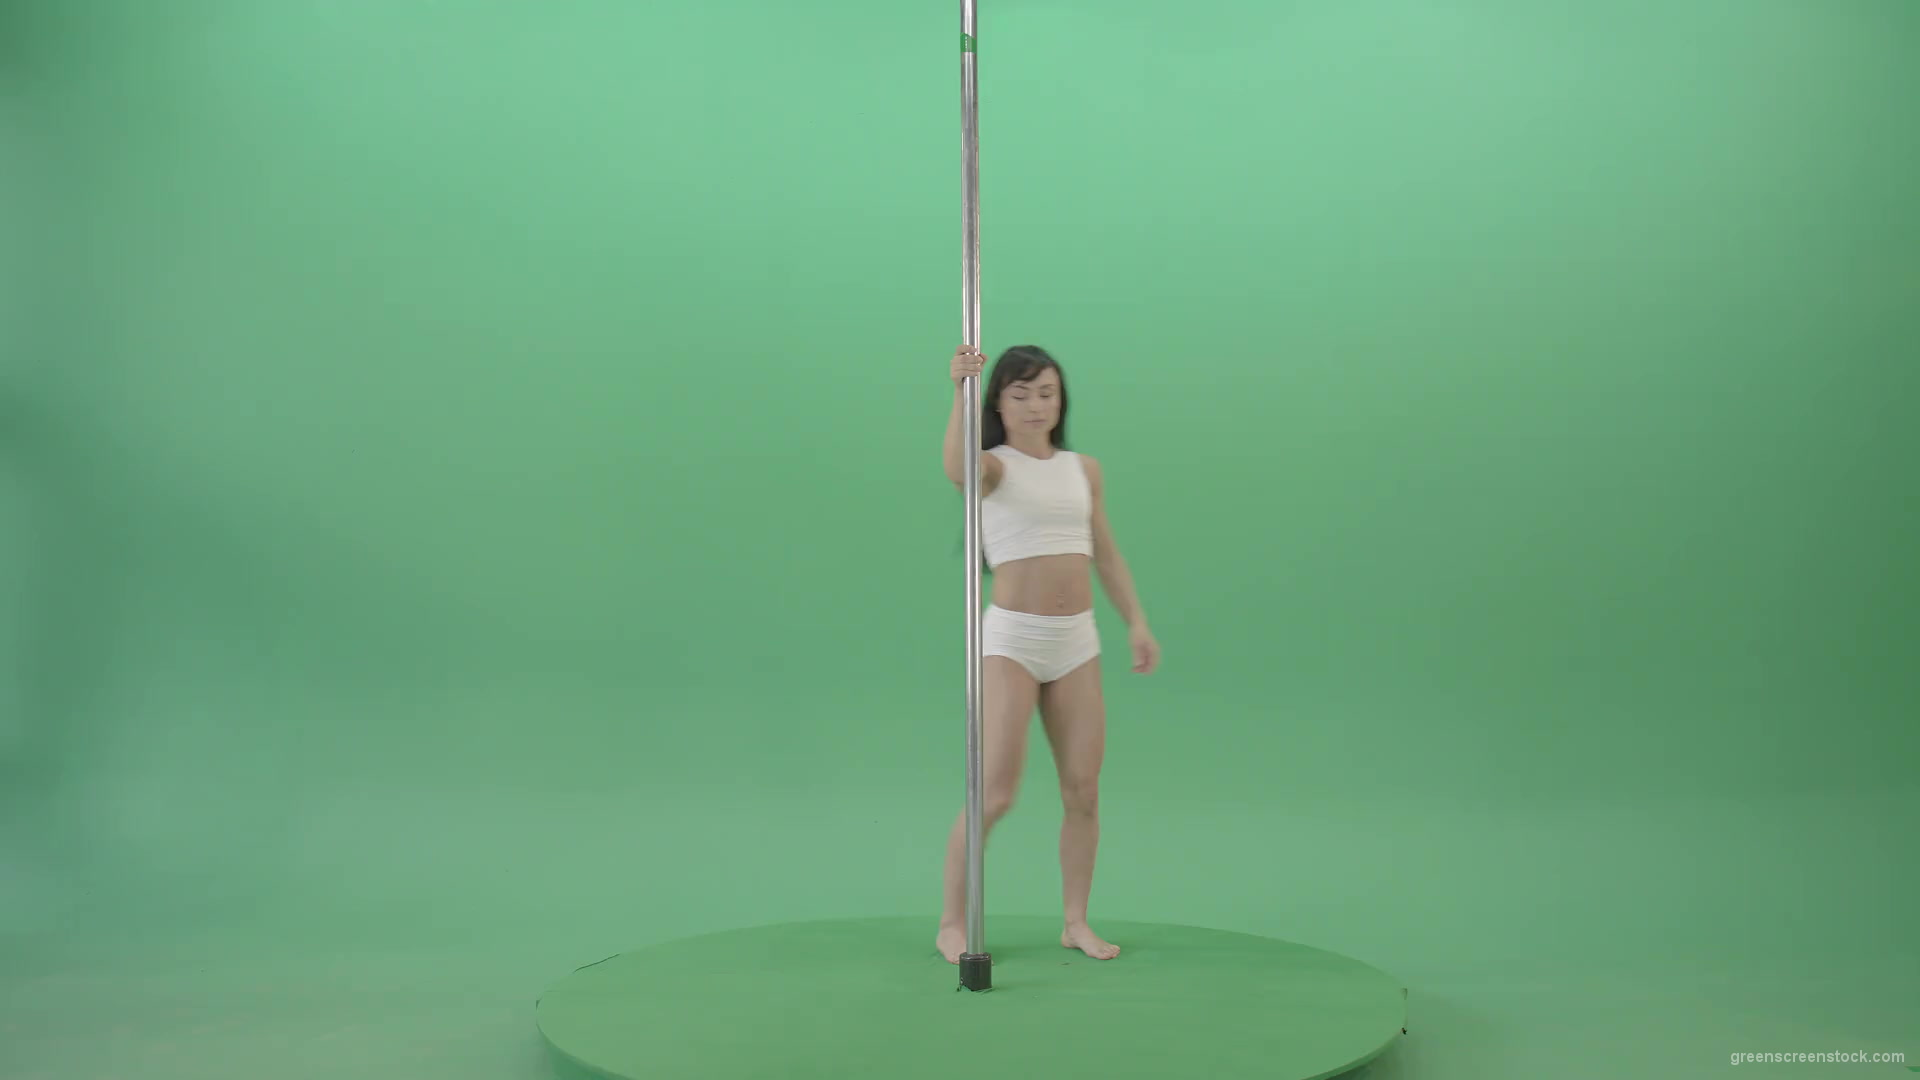 Small-Girl-make-spin-pole-fly-isolated-on-green-screen-4K-Video-Footage--1920_001 Green Screen Stock